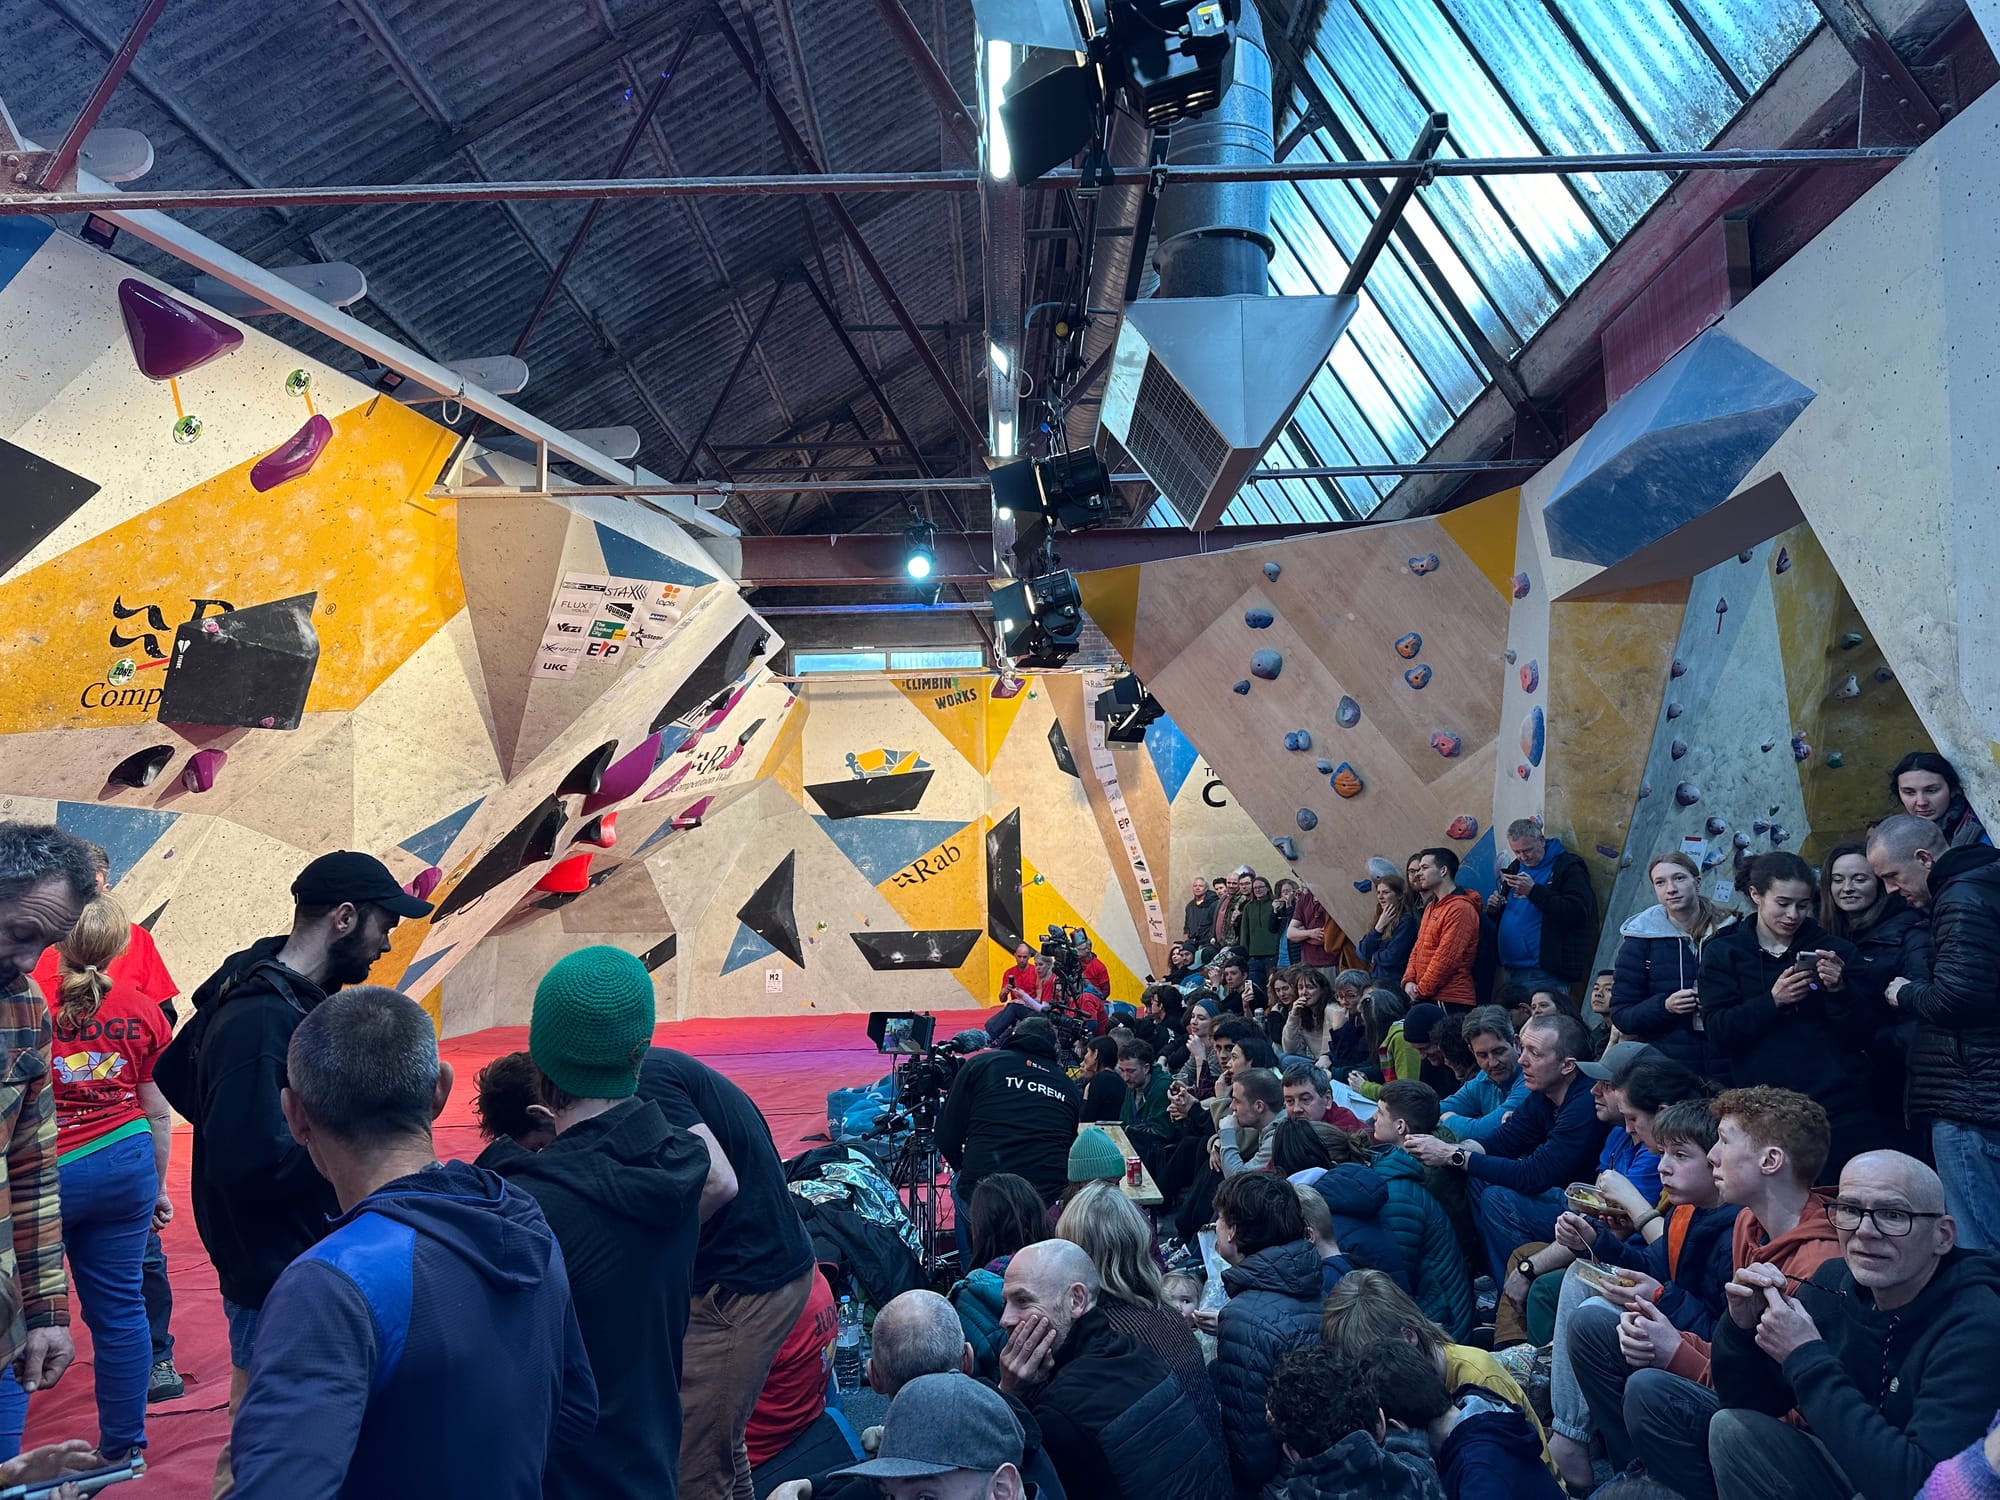 The audience getting settled in the Climbing Works before the final